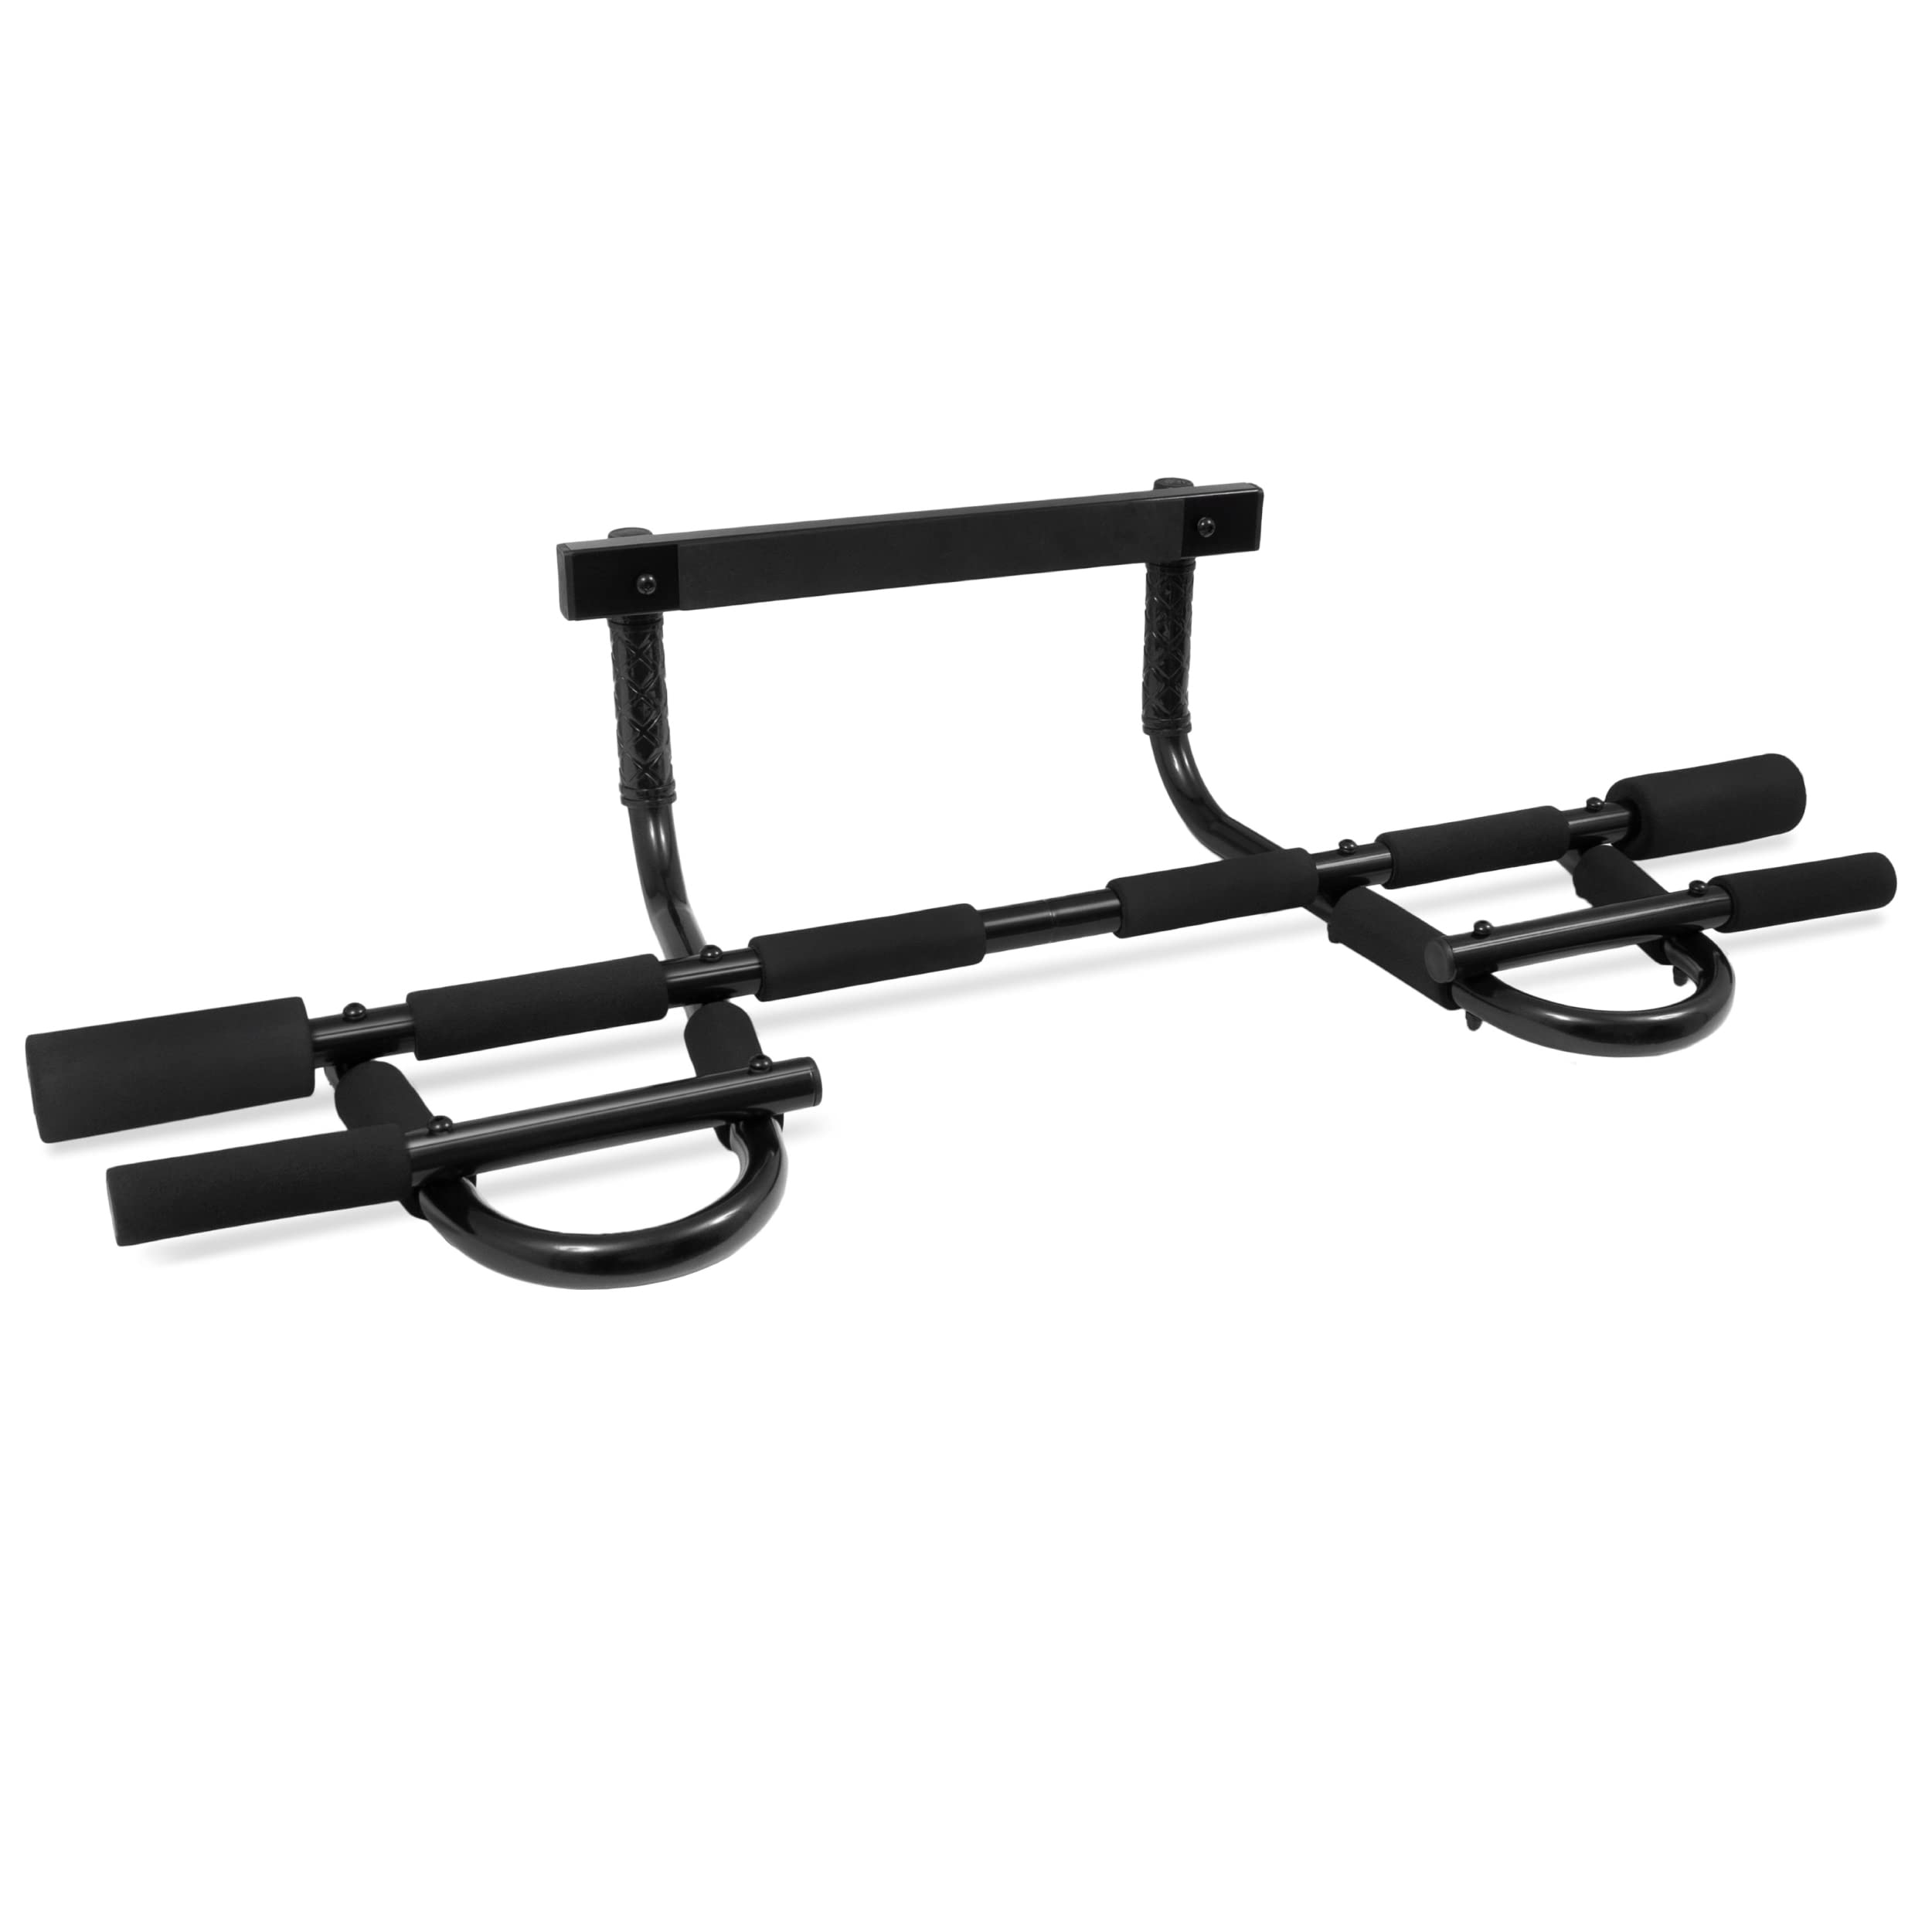 ProSource Multi-Grip Chin-UpPull-Up Bar Heavy Duty Doorway Trainer for Home Gym by ProSource